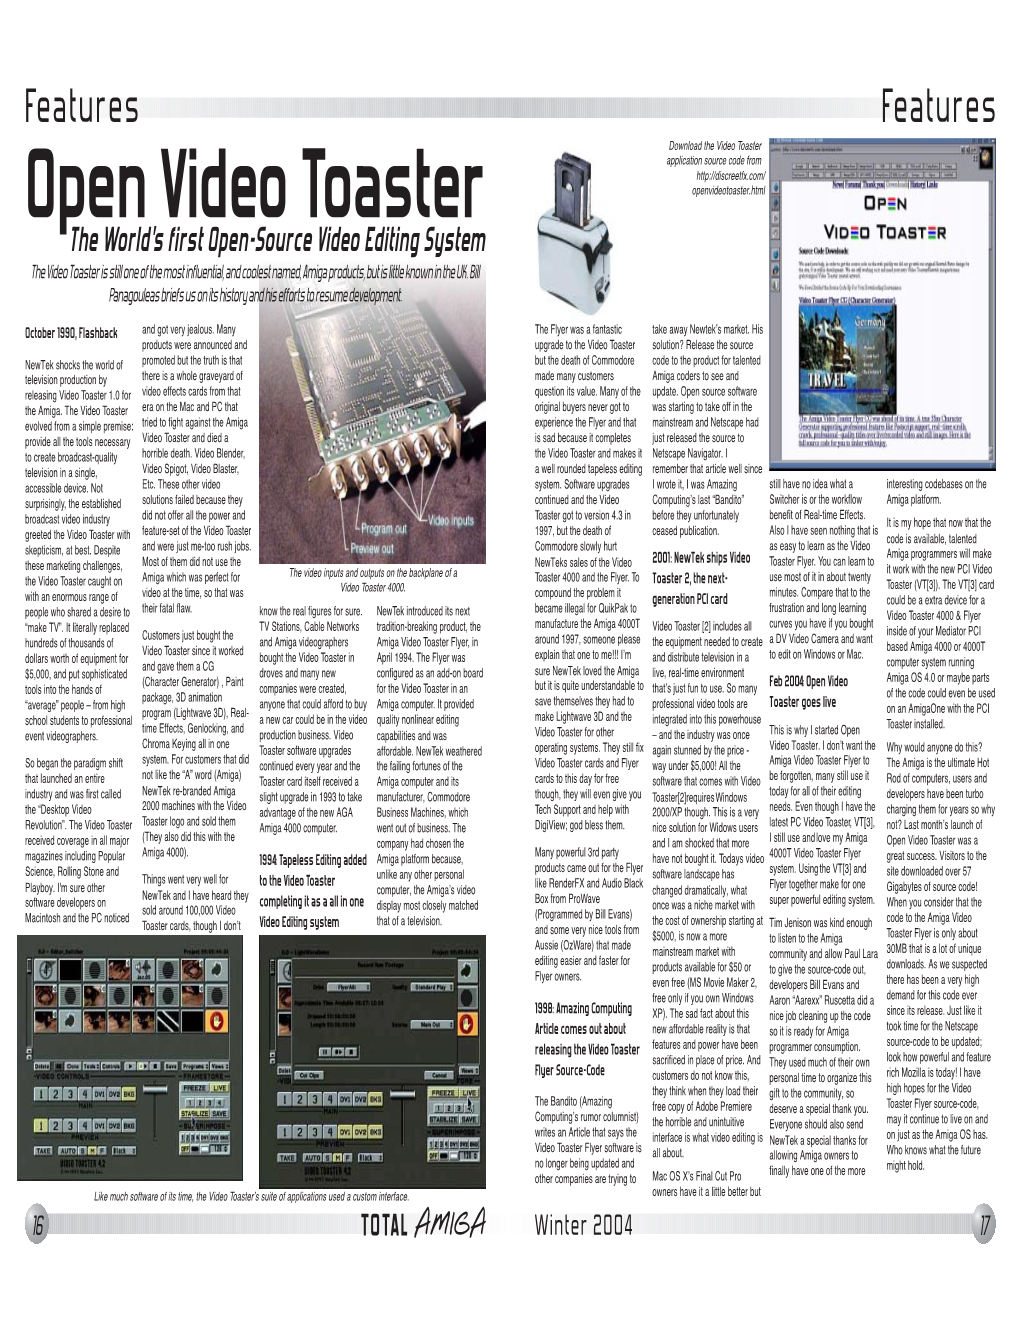 Open Video Toaster Was a Amiga 4000)